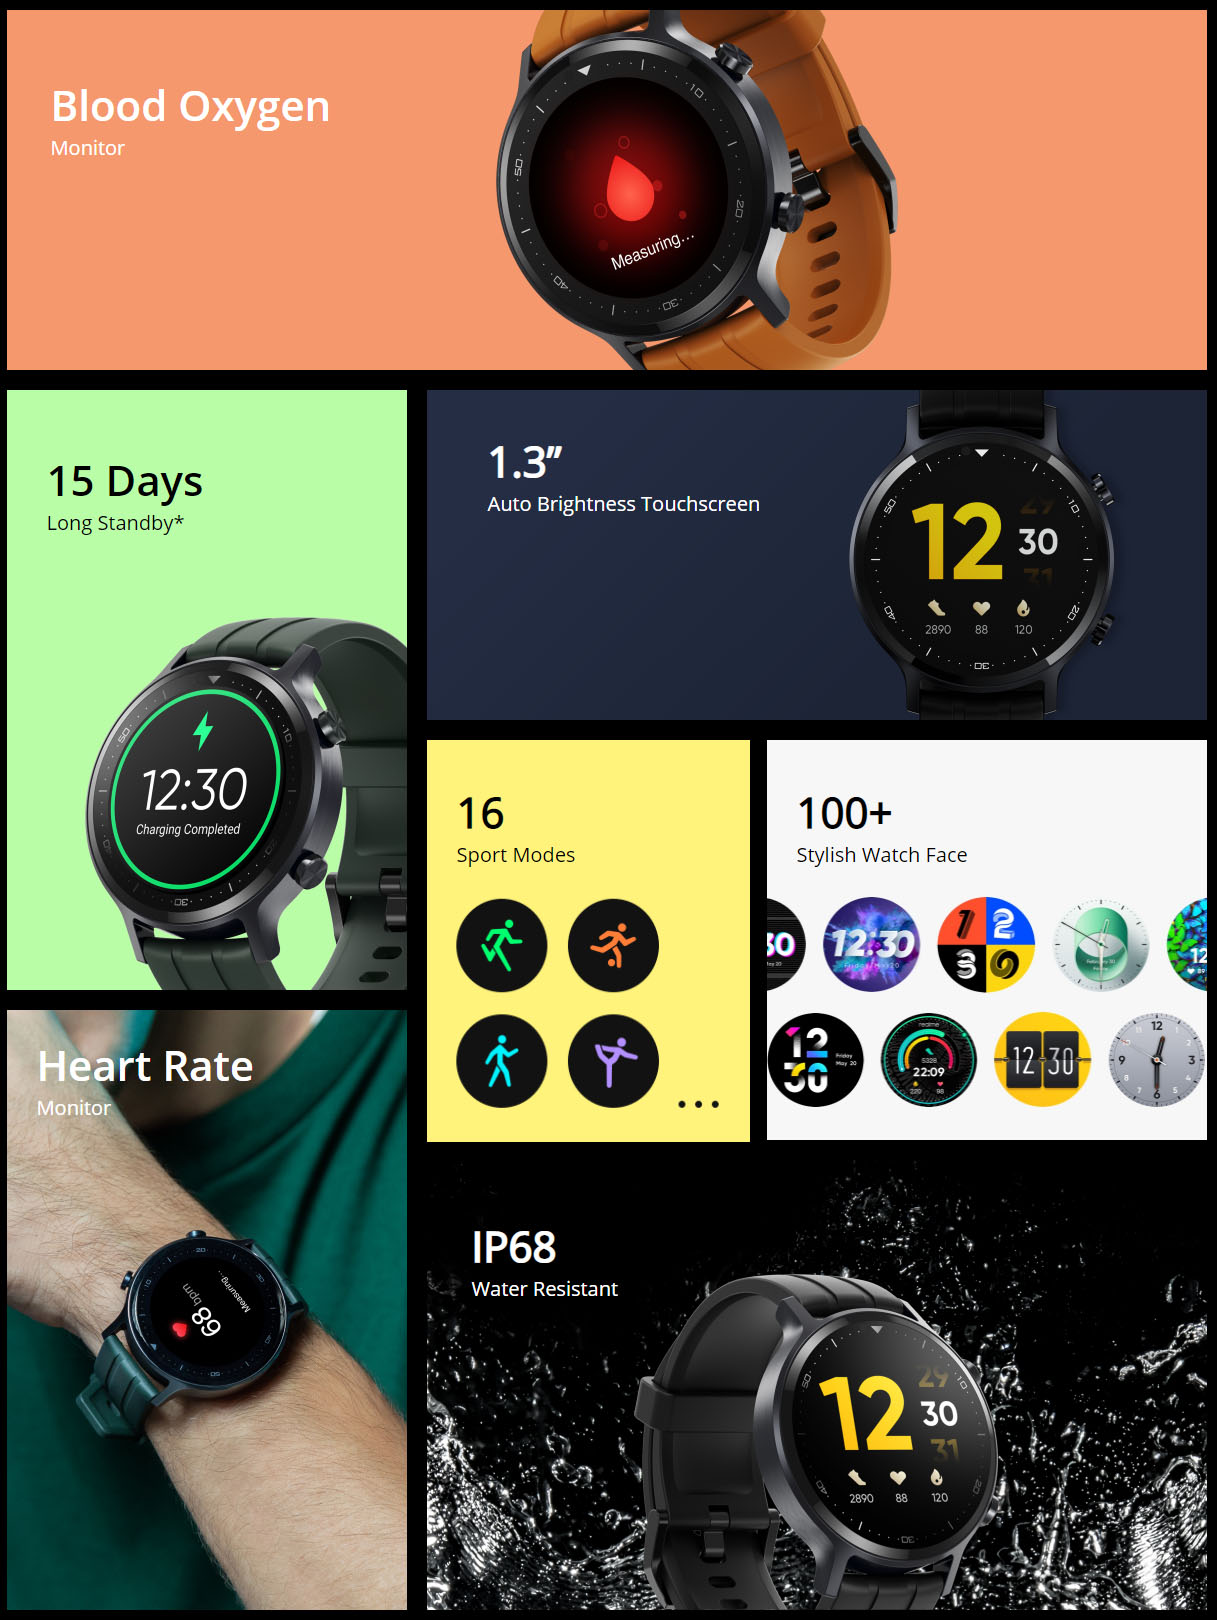 Realme Watch S launch